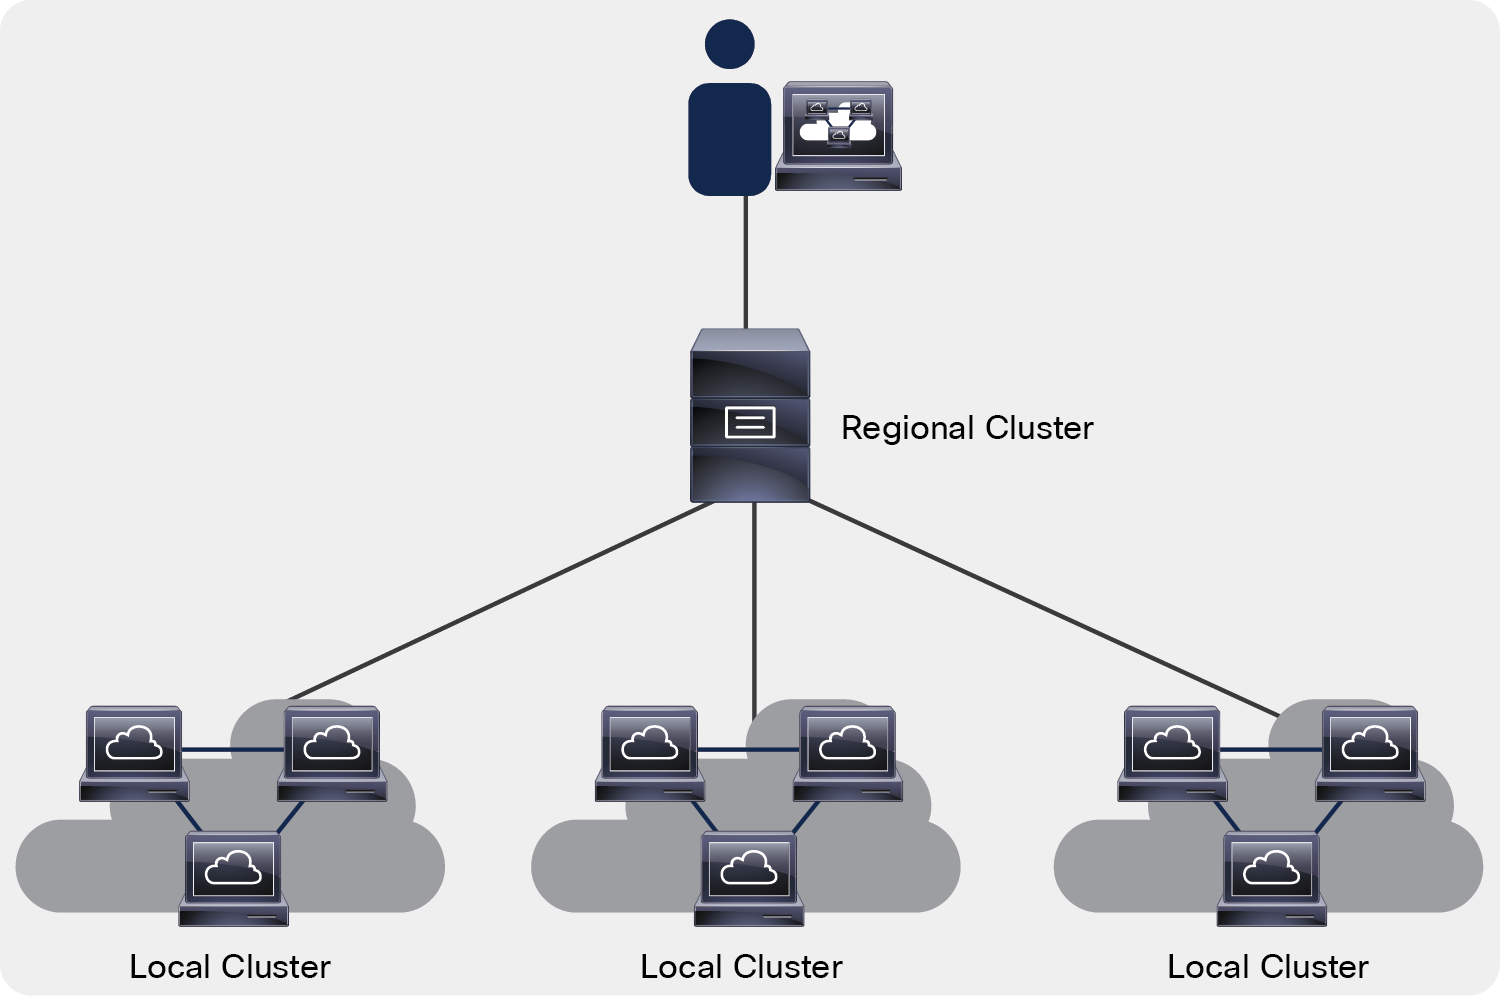 PNR deployment architecture using Regional and Local clusters